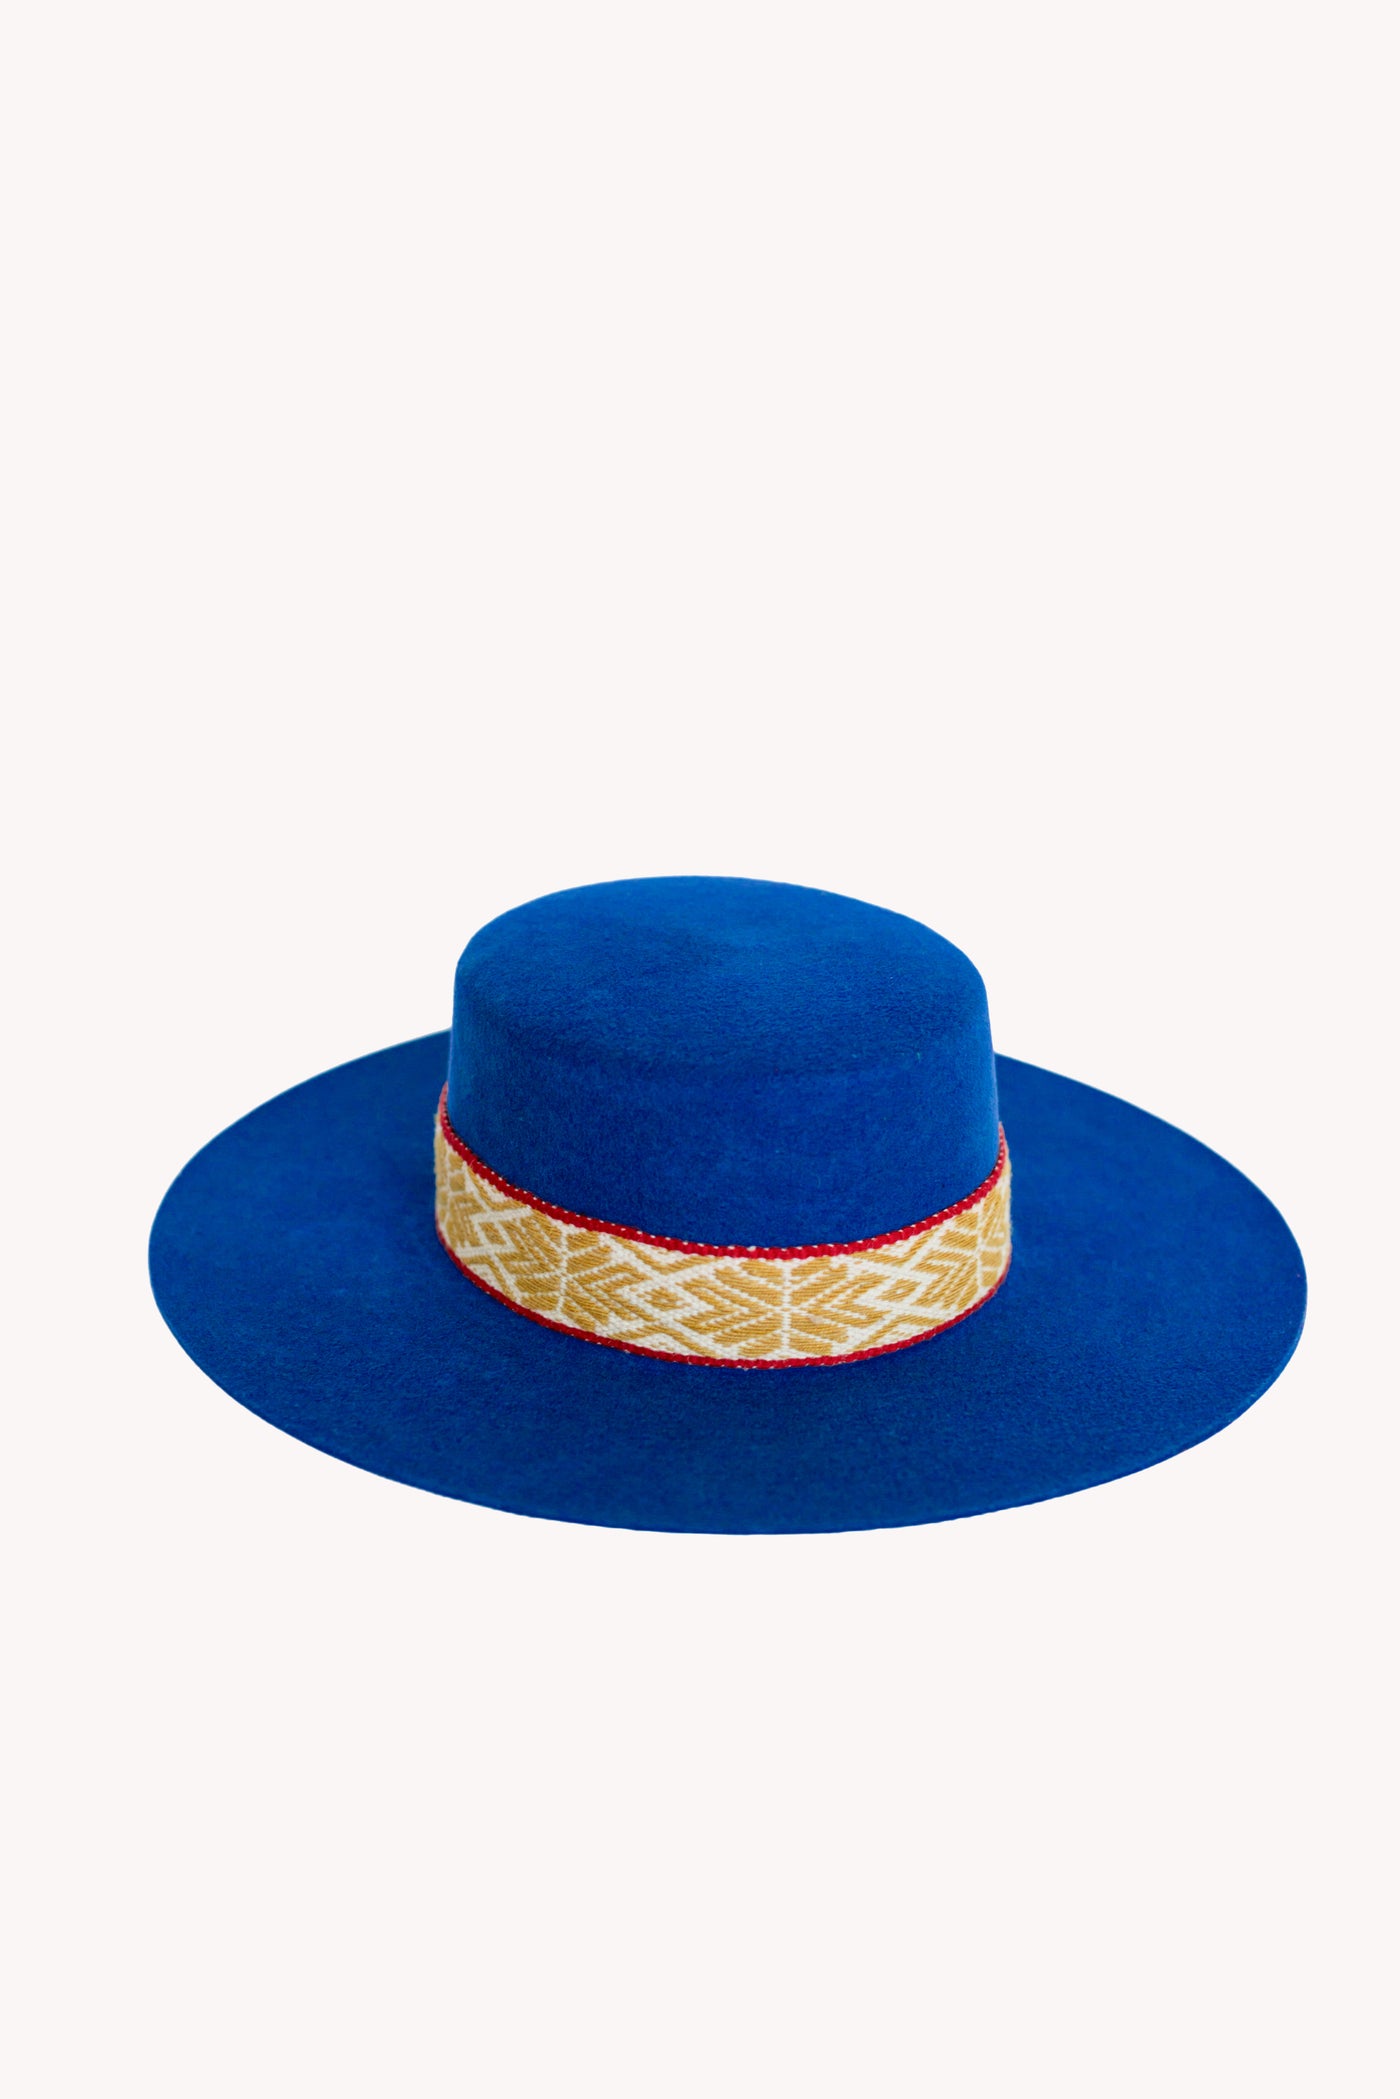 Electric Blue Spanish Hat with Abundance Intention Band Removable Intention Hat Textile Band